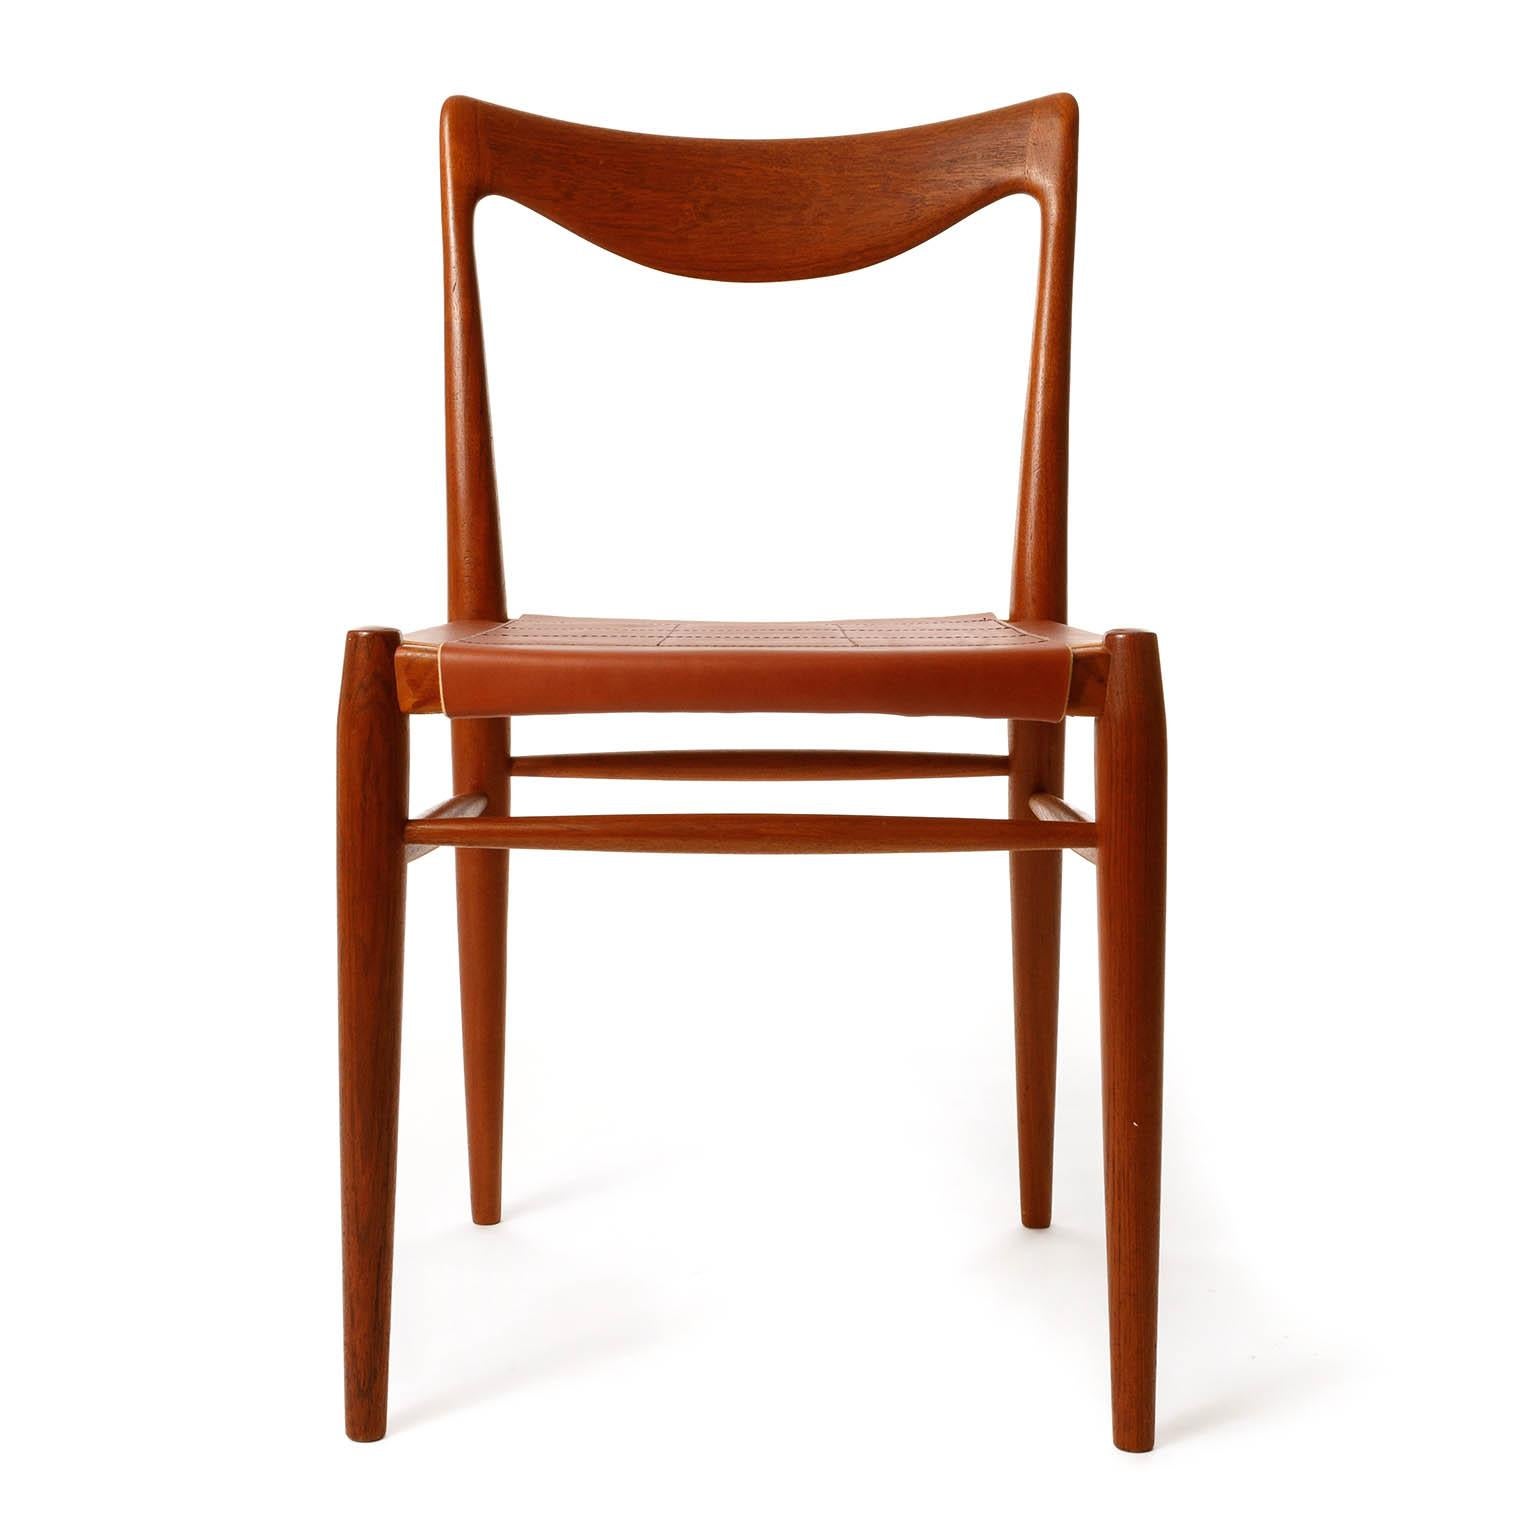 Mid-20th Century Six 'Bambi' Chairs Rastad & Relling for Gustav Bahus, Cognac Leather Teak, 1950s For Sale